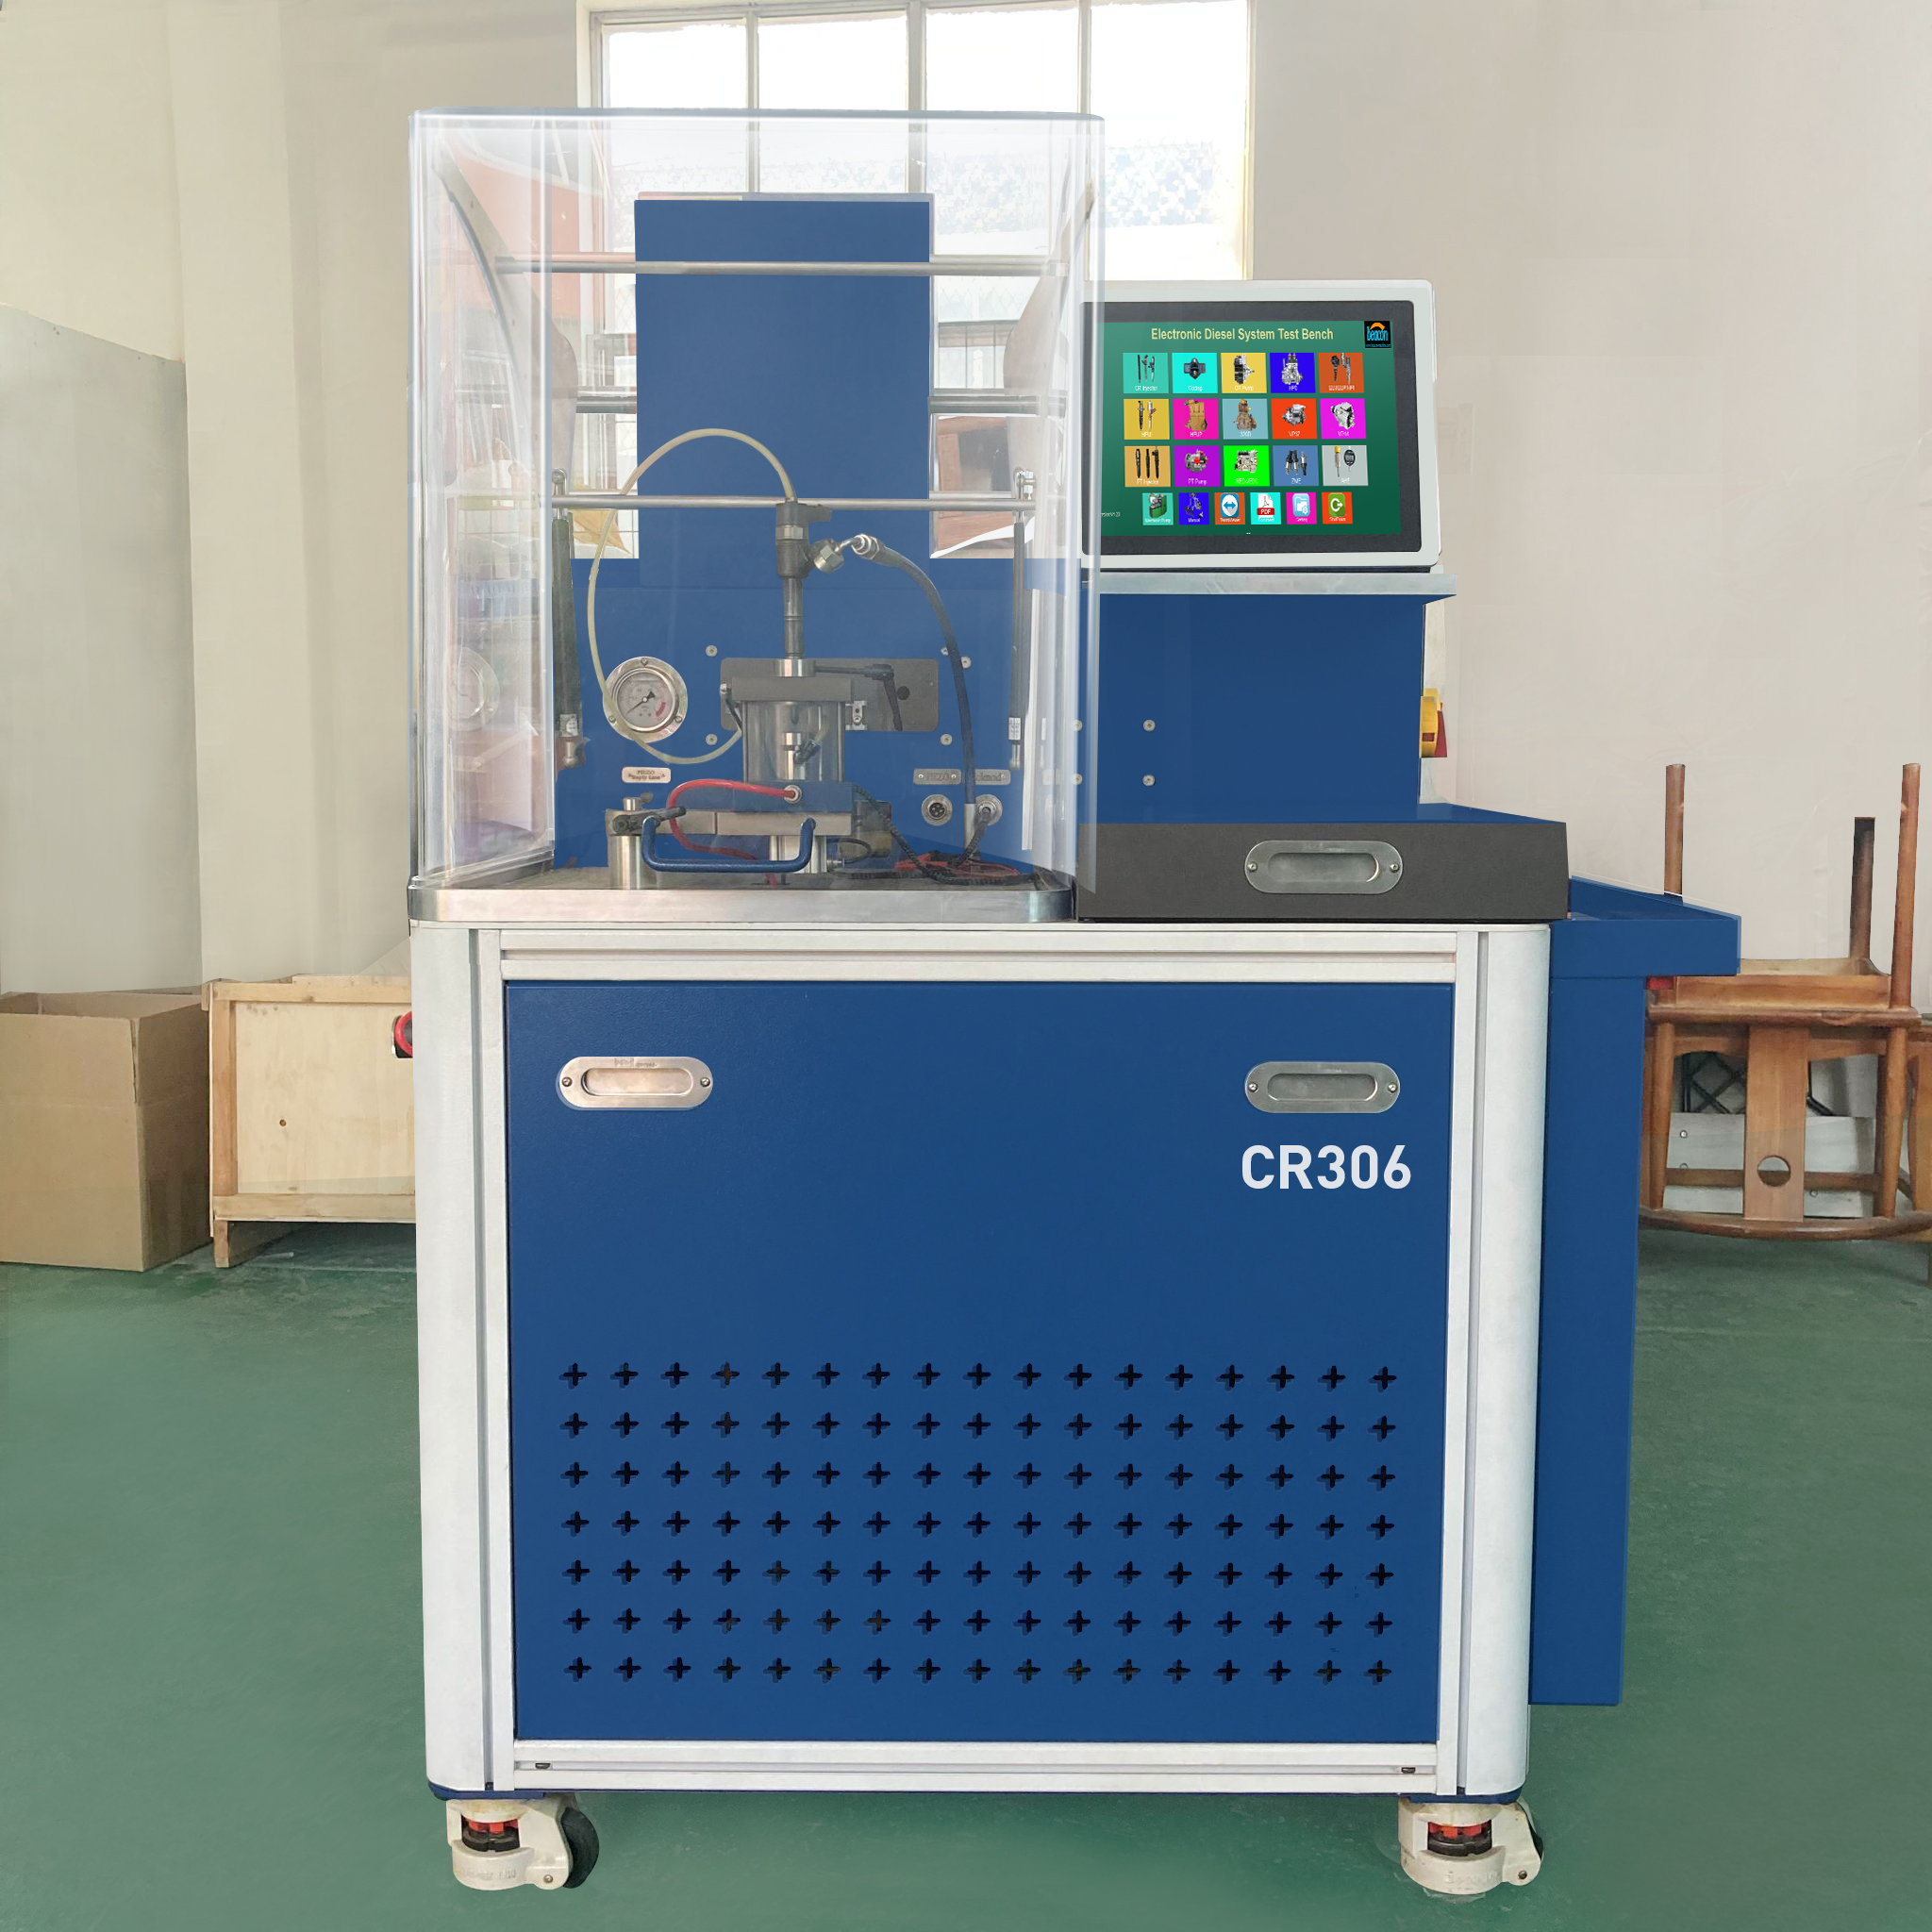 CR306 High pressure common rail diesel fuel injector test bench